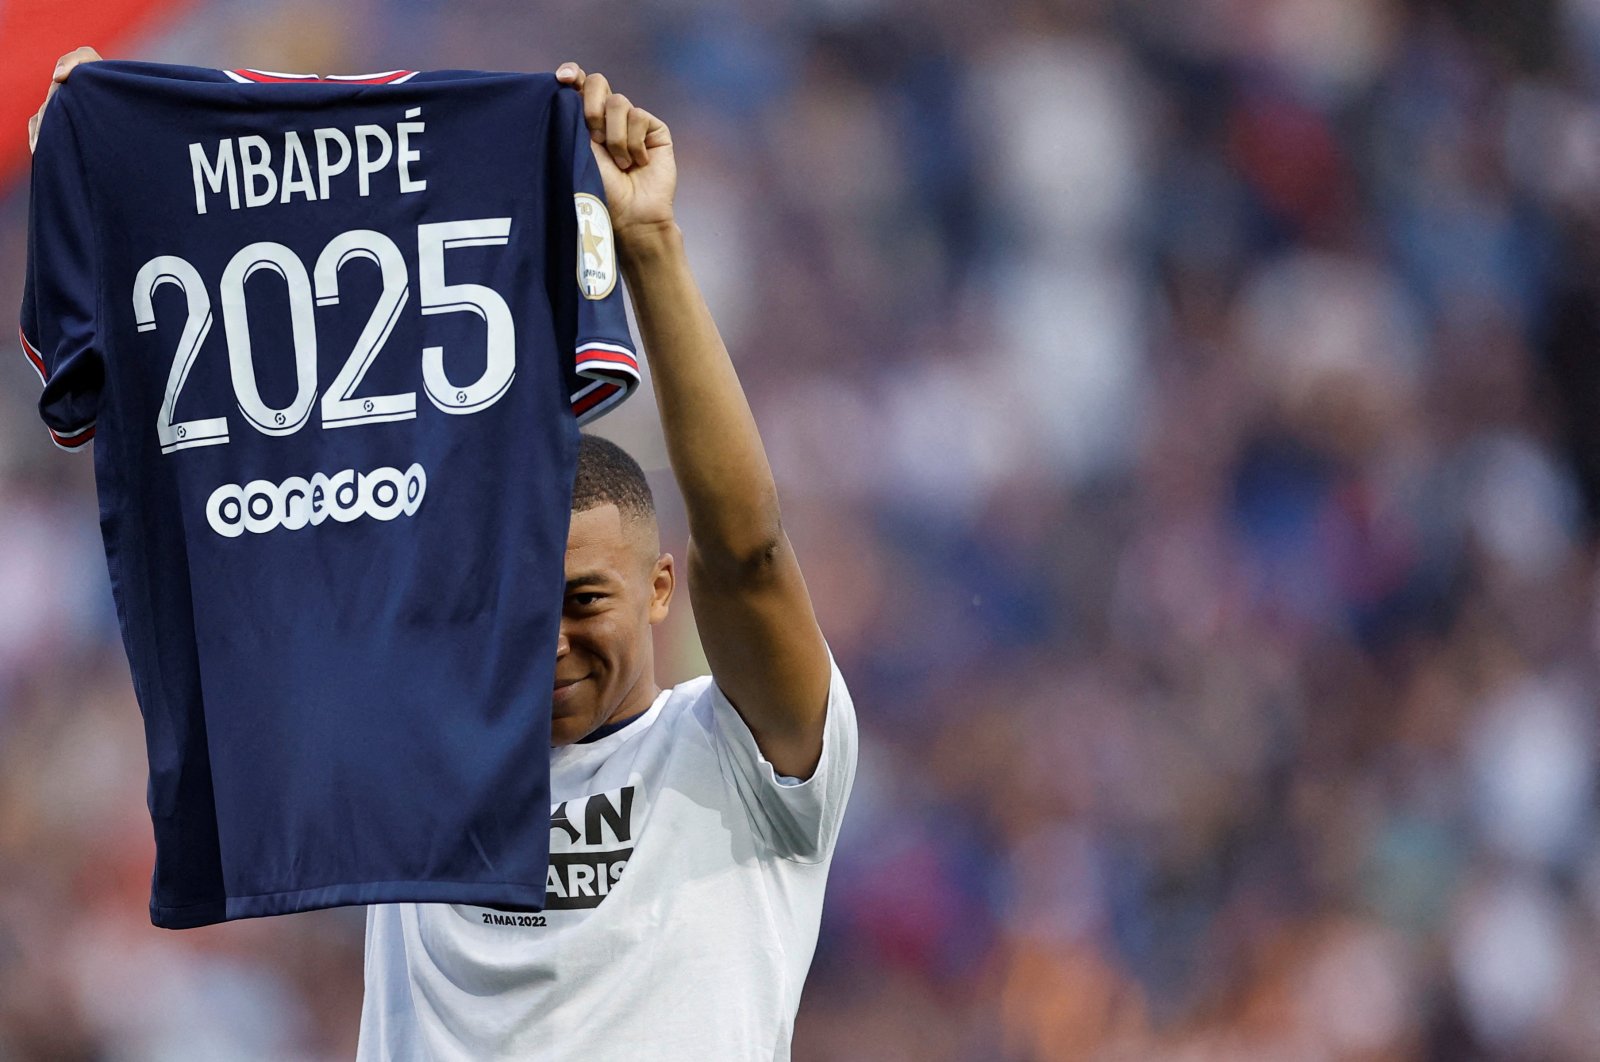 PSG&#039;s Kylian Mbappe holds up a shirt after signing a new contract, Paris, France, May 21, 2022. (Reuters Photo)